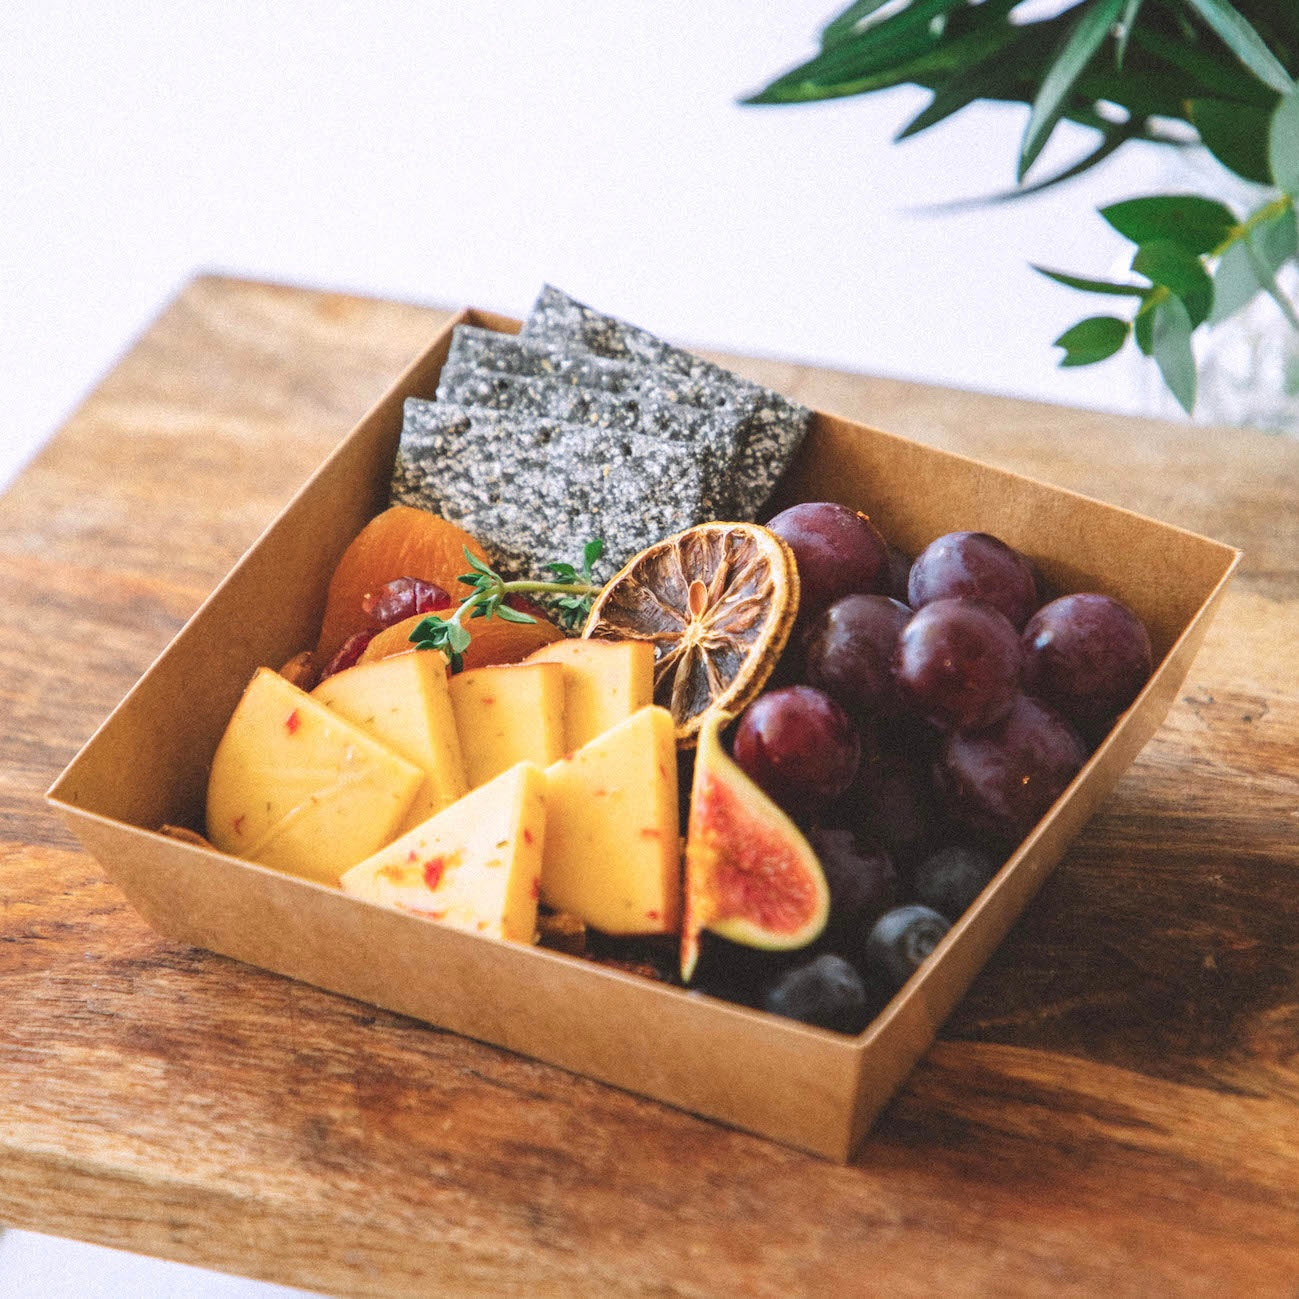 Personal Canapé & Cheese Box Catering